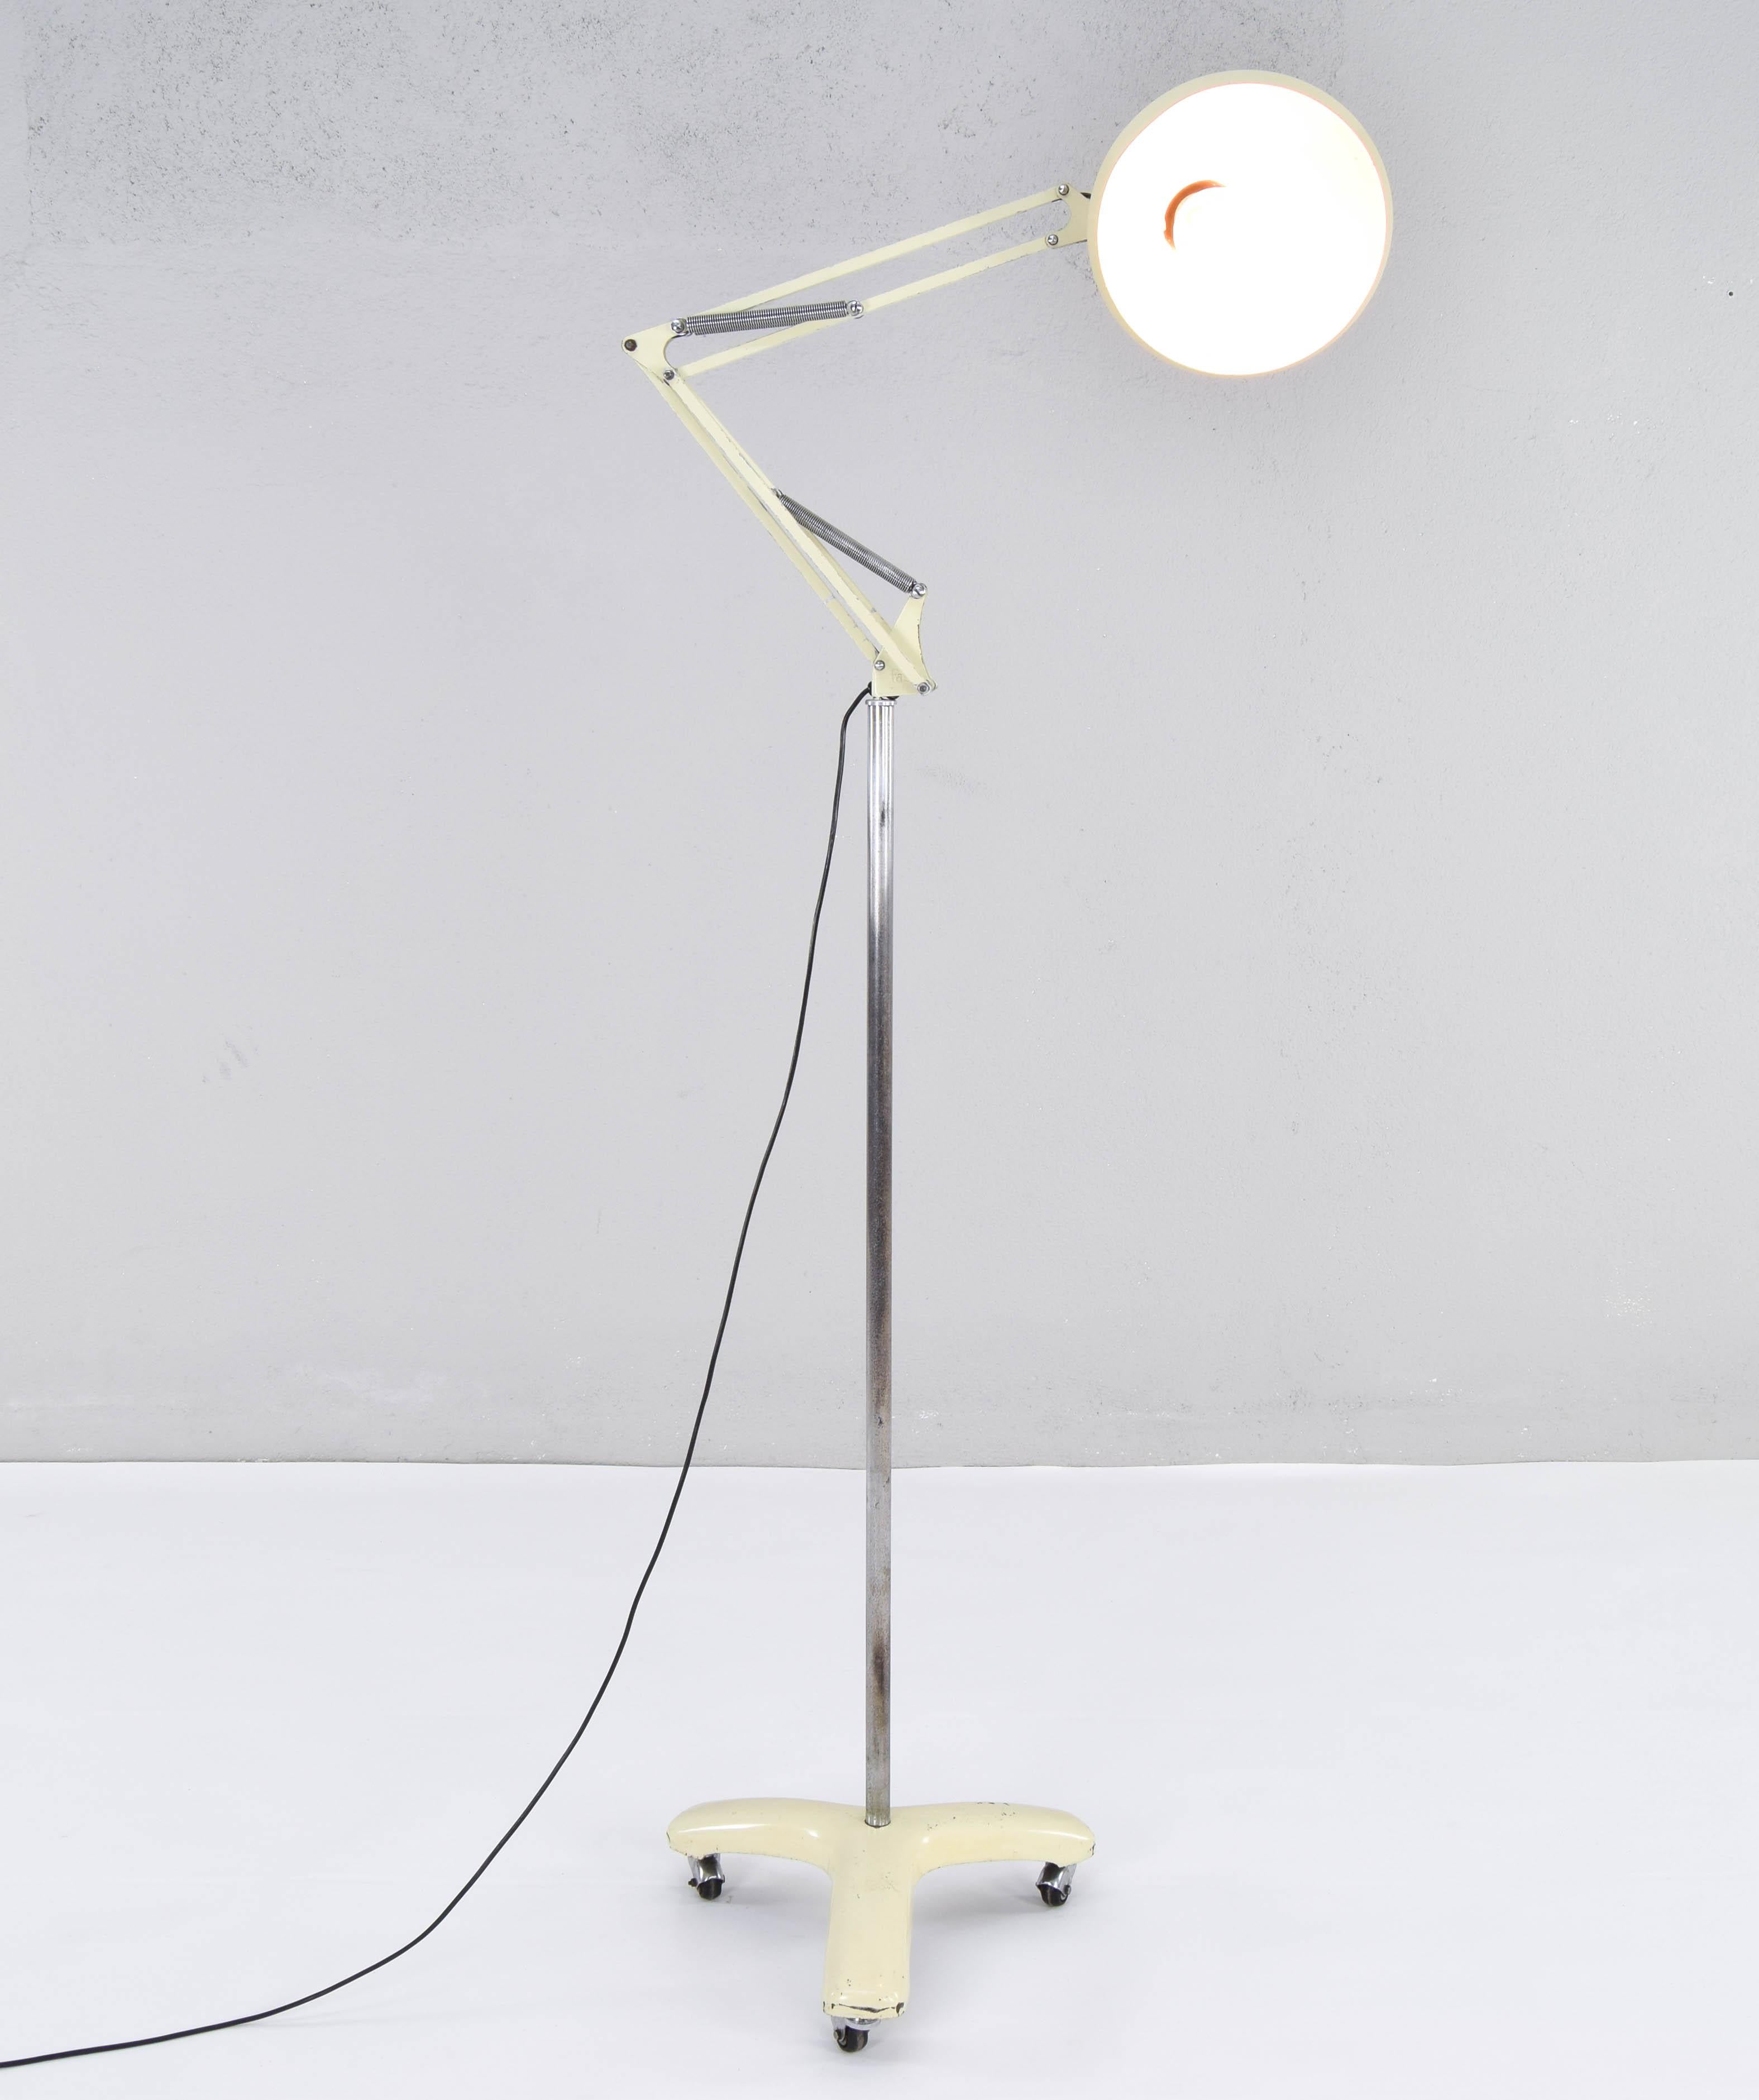 Faro model lamp for medical clinic of the renowned Spanish brand Fase. Articulable, with steerable lampshade and with wheels. With all the characteristics of a medical consultation lamp and with the quality design of the firm.
This lamp has a